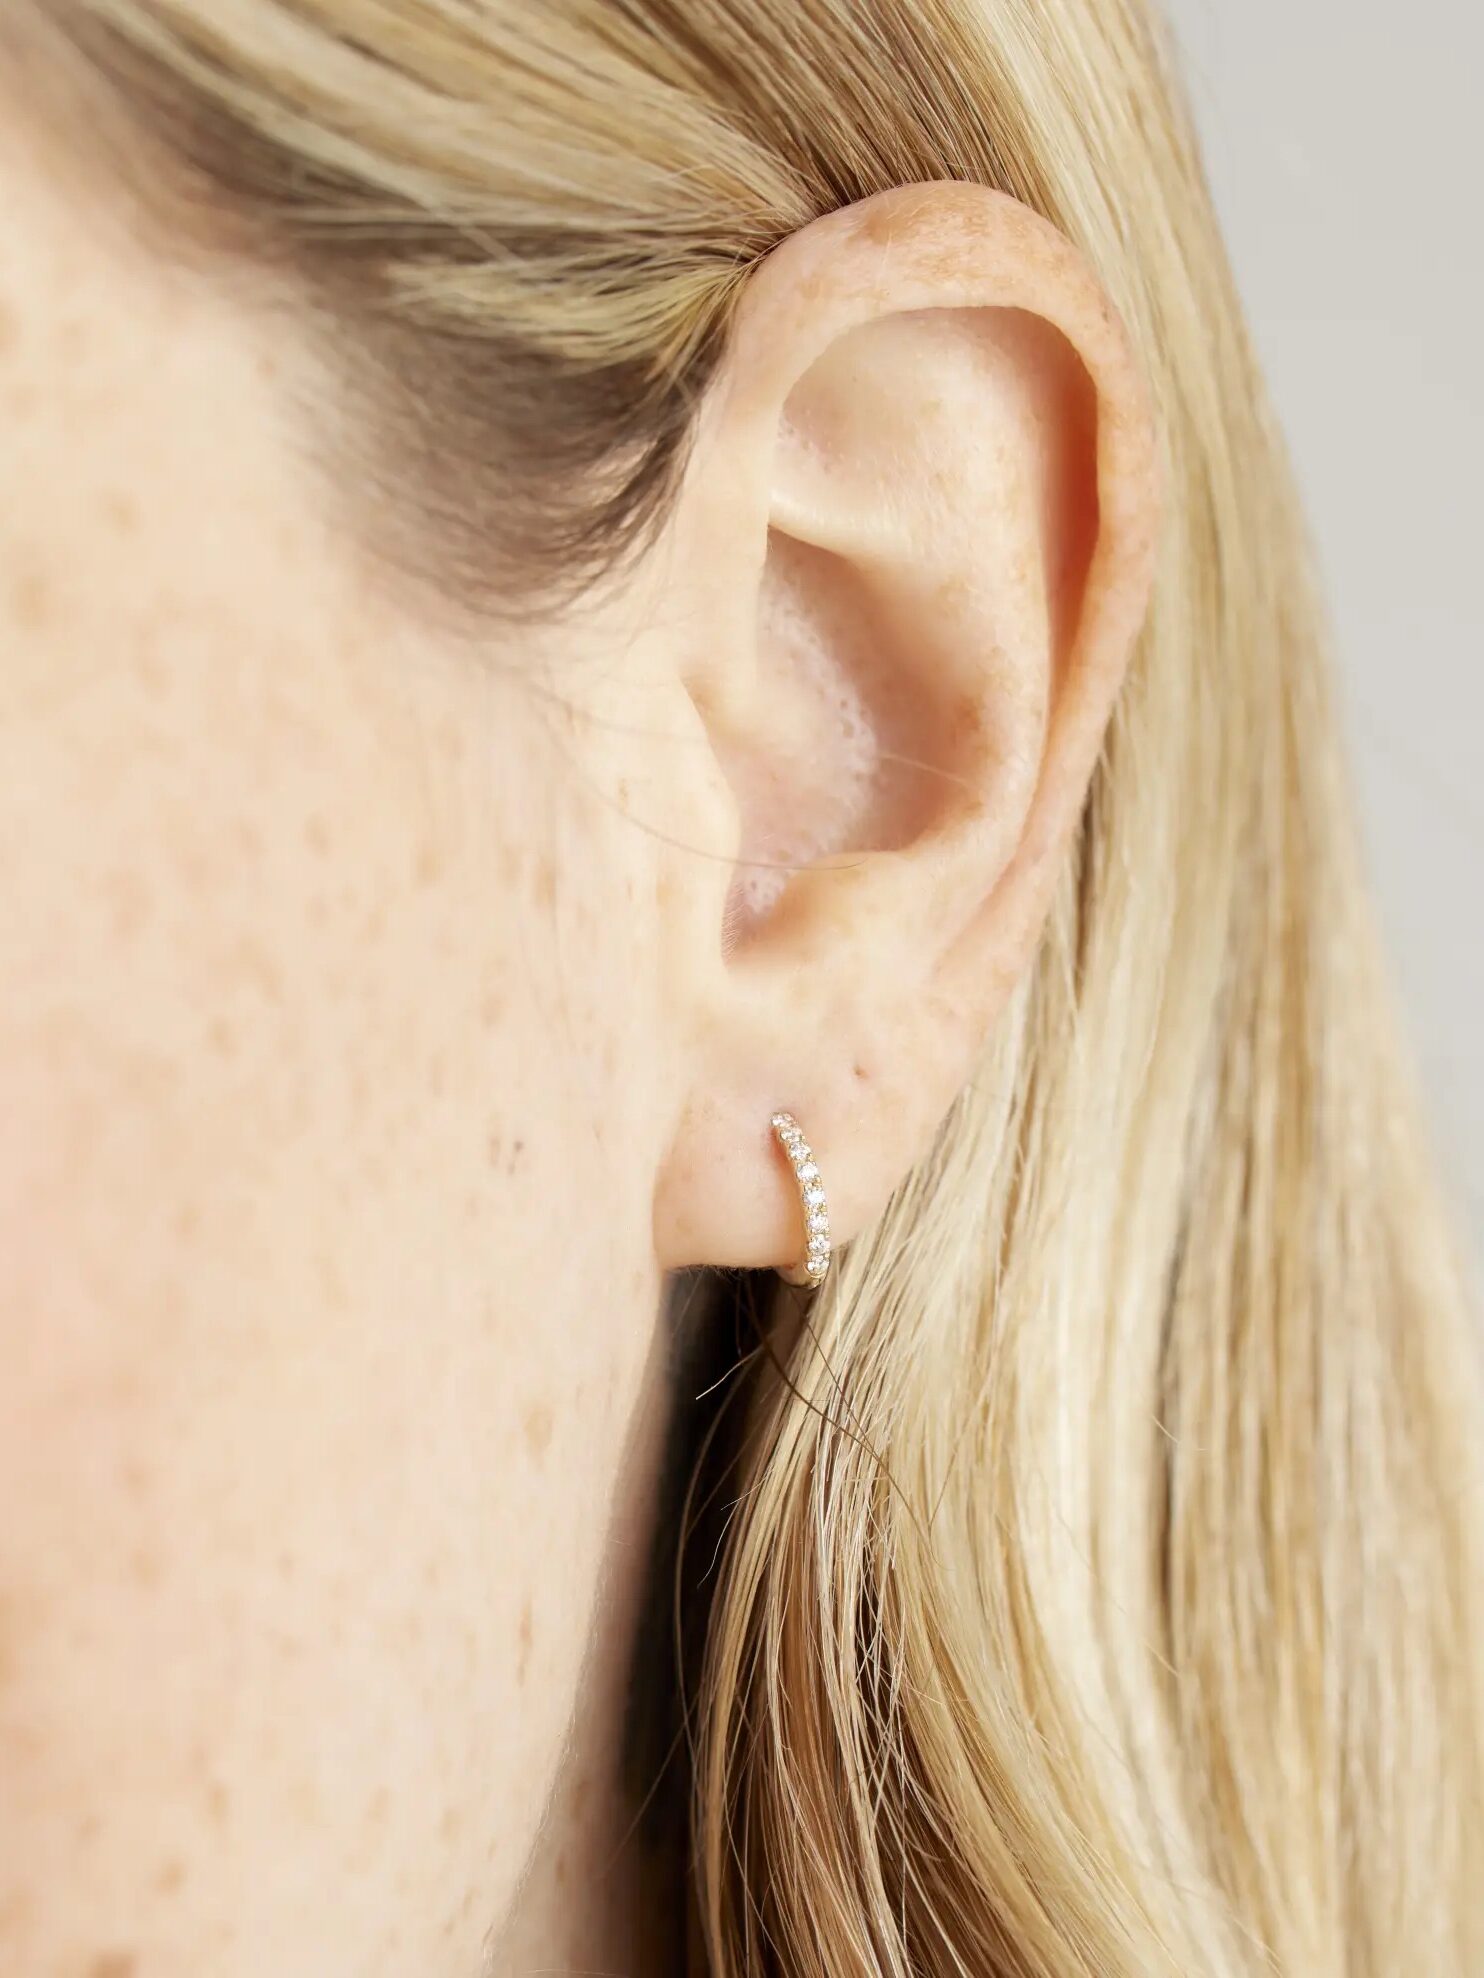 Close-up of a woman's ear showing a small diamond-studded earring, with a focus on her light freckled skin.